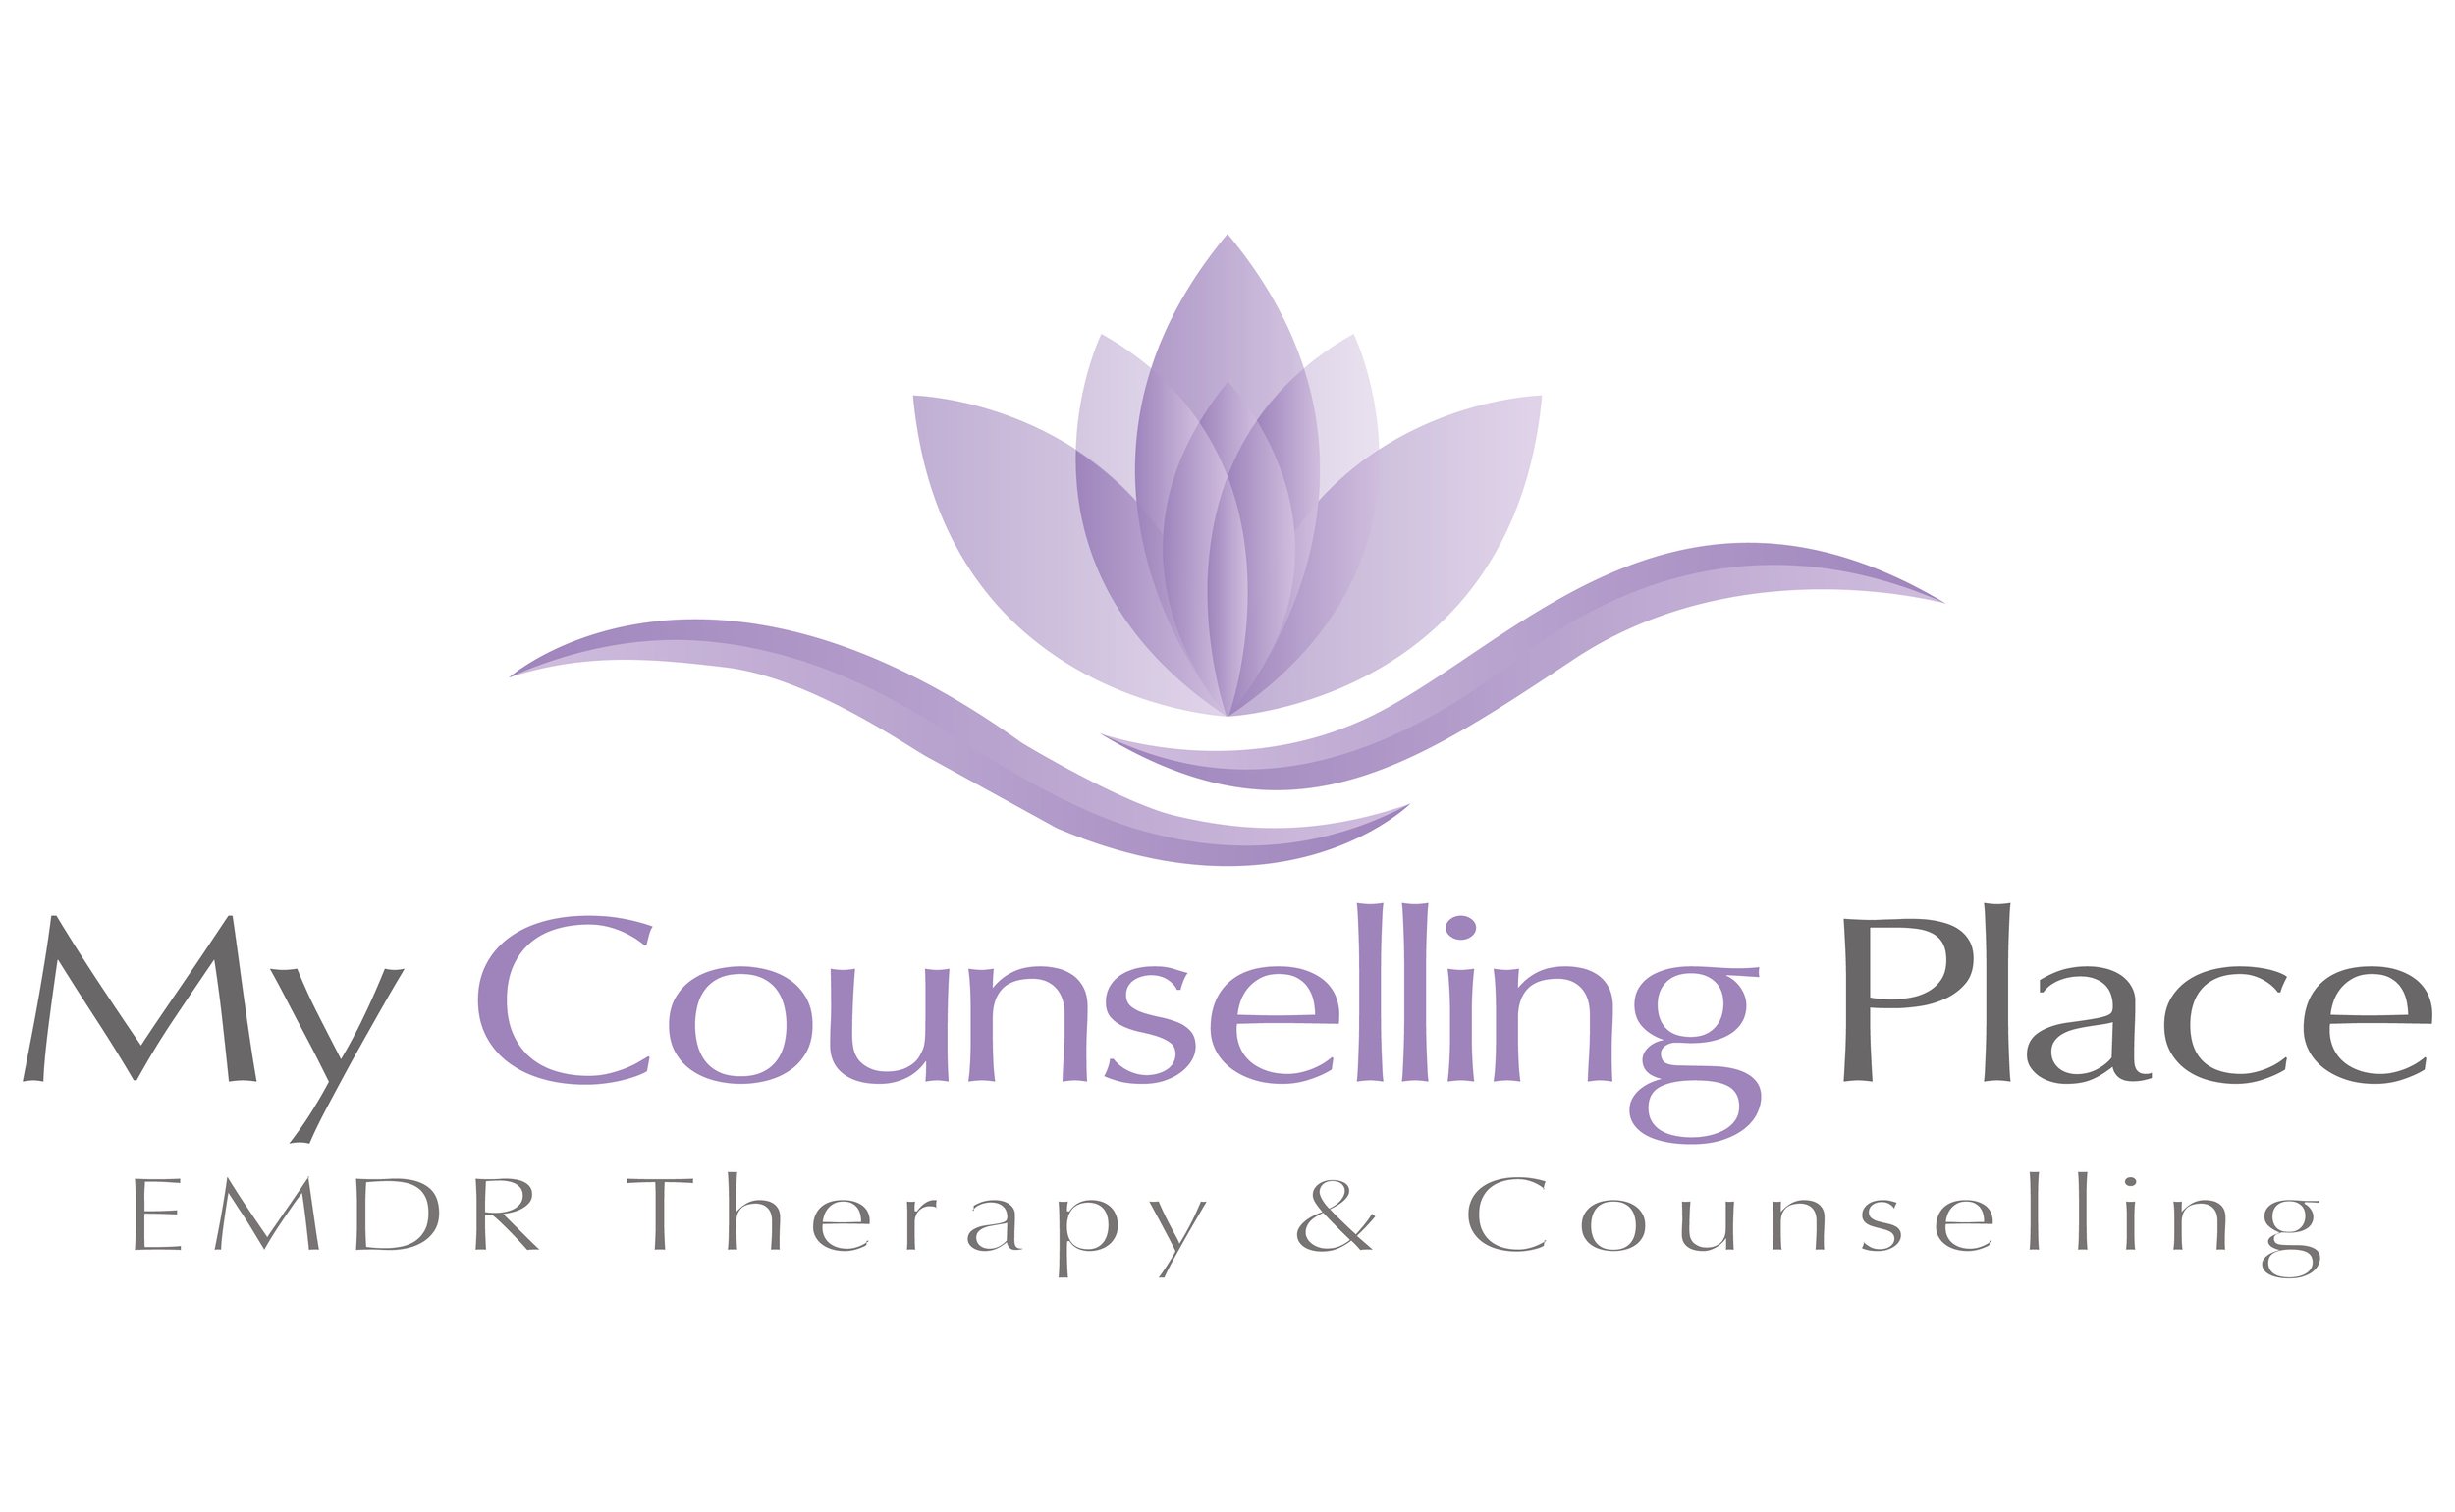 My Counselling Place